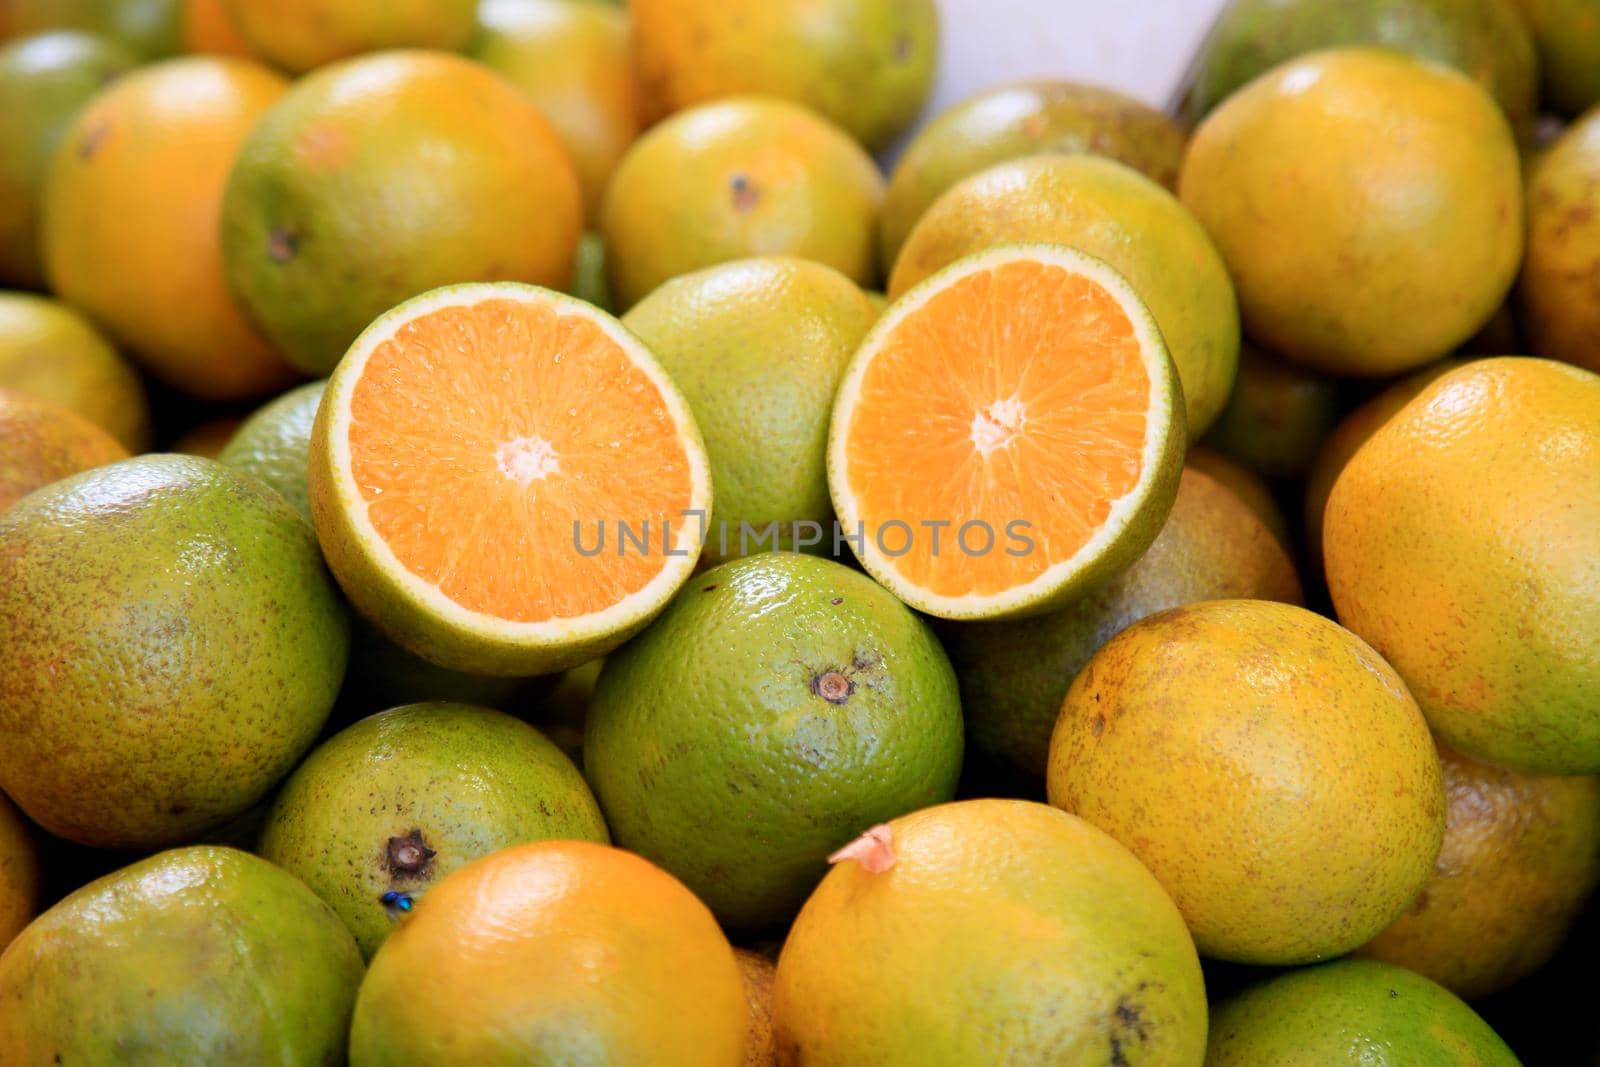 salvador, bahia, brazil - january 27, 2021: orange fruits are seen for sale at the fair in japan, in the Liberdade neighborhood in the city of Salvador.
